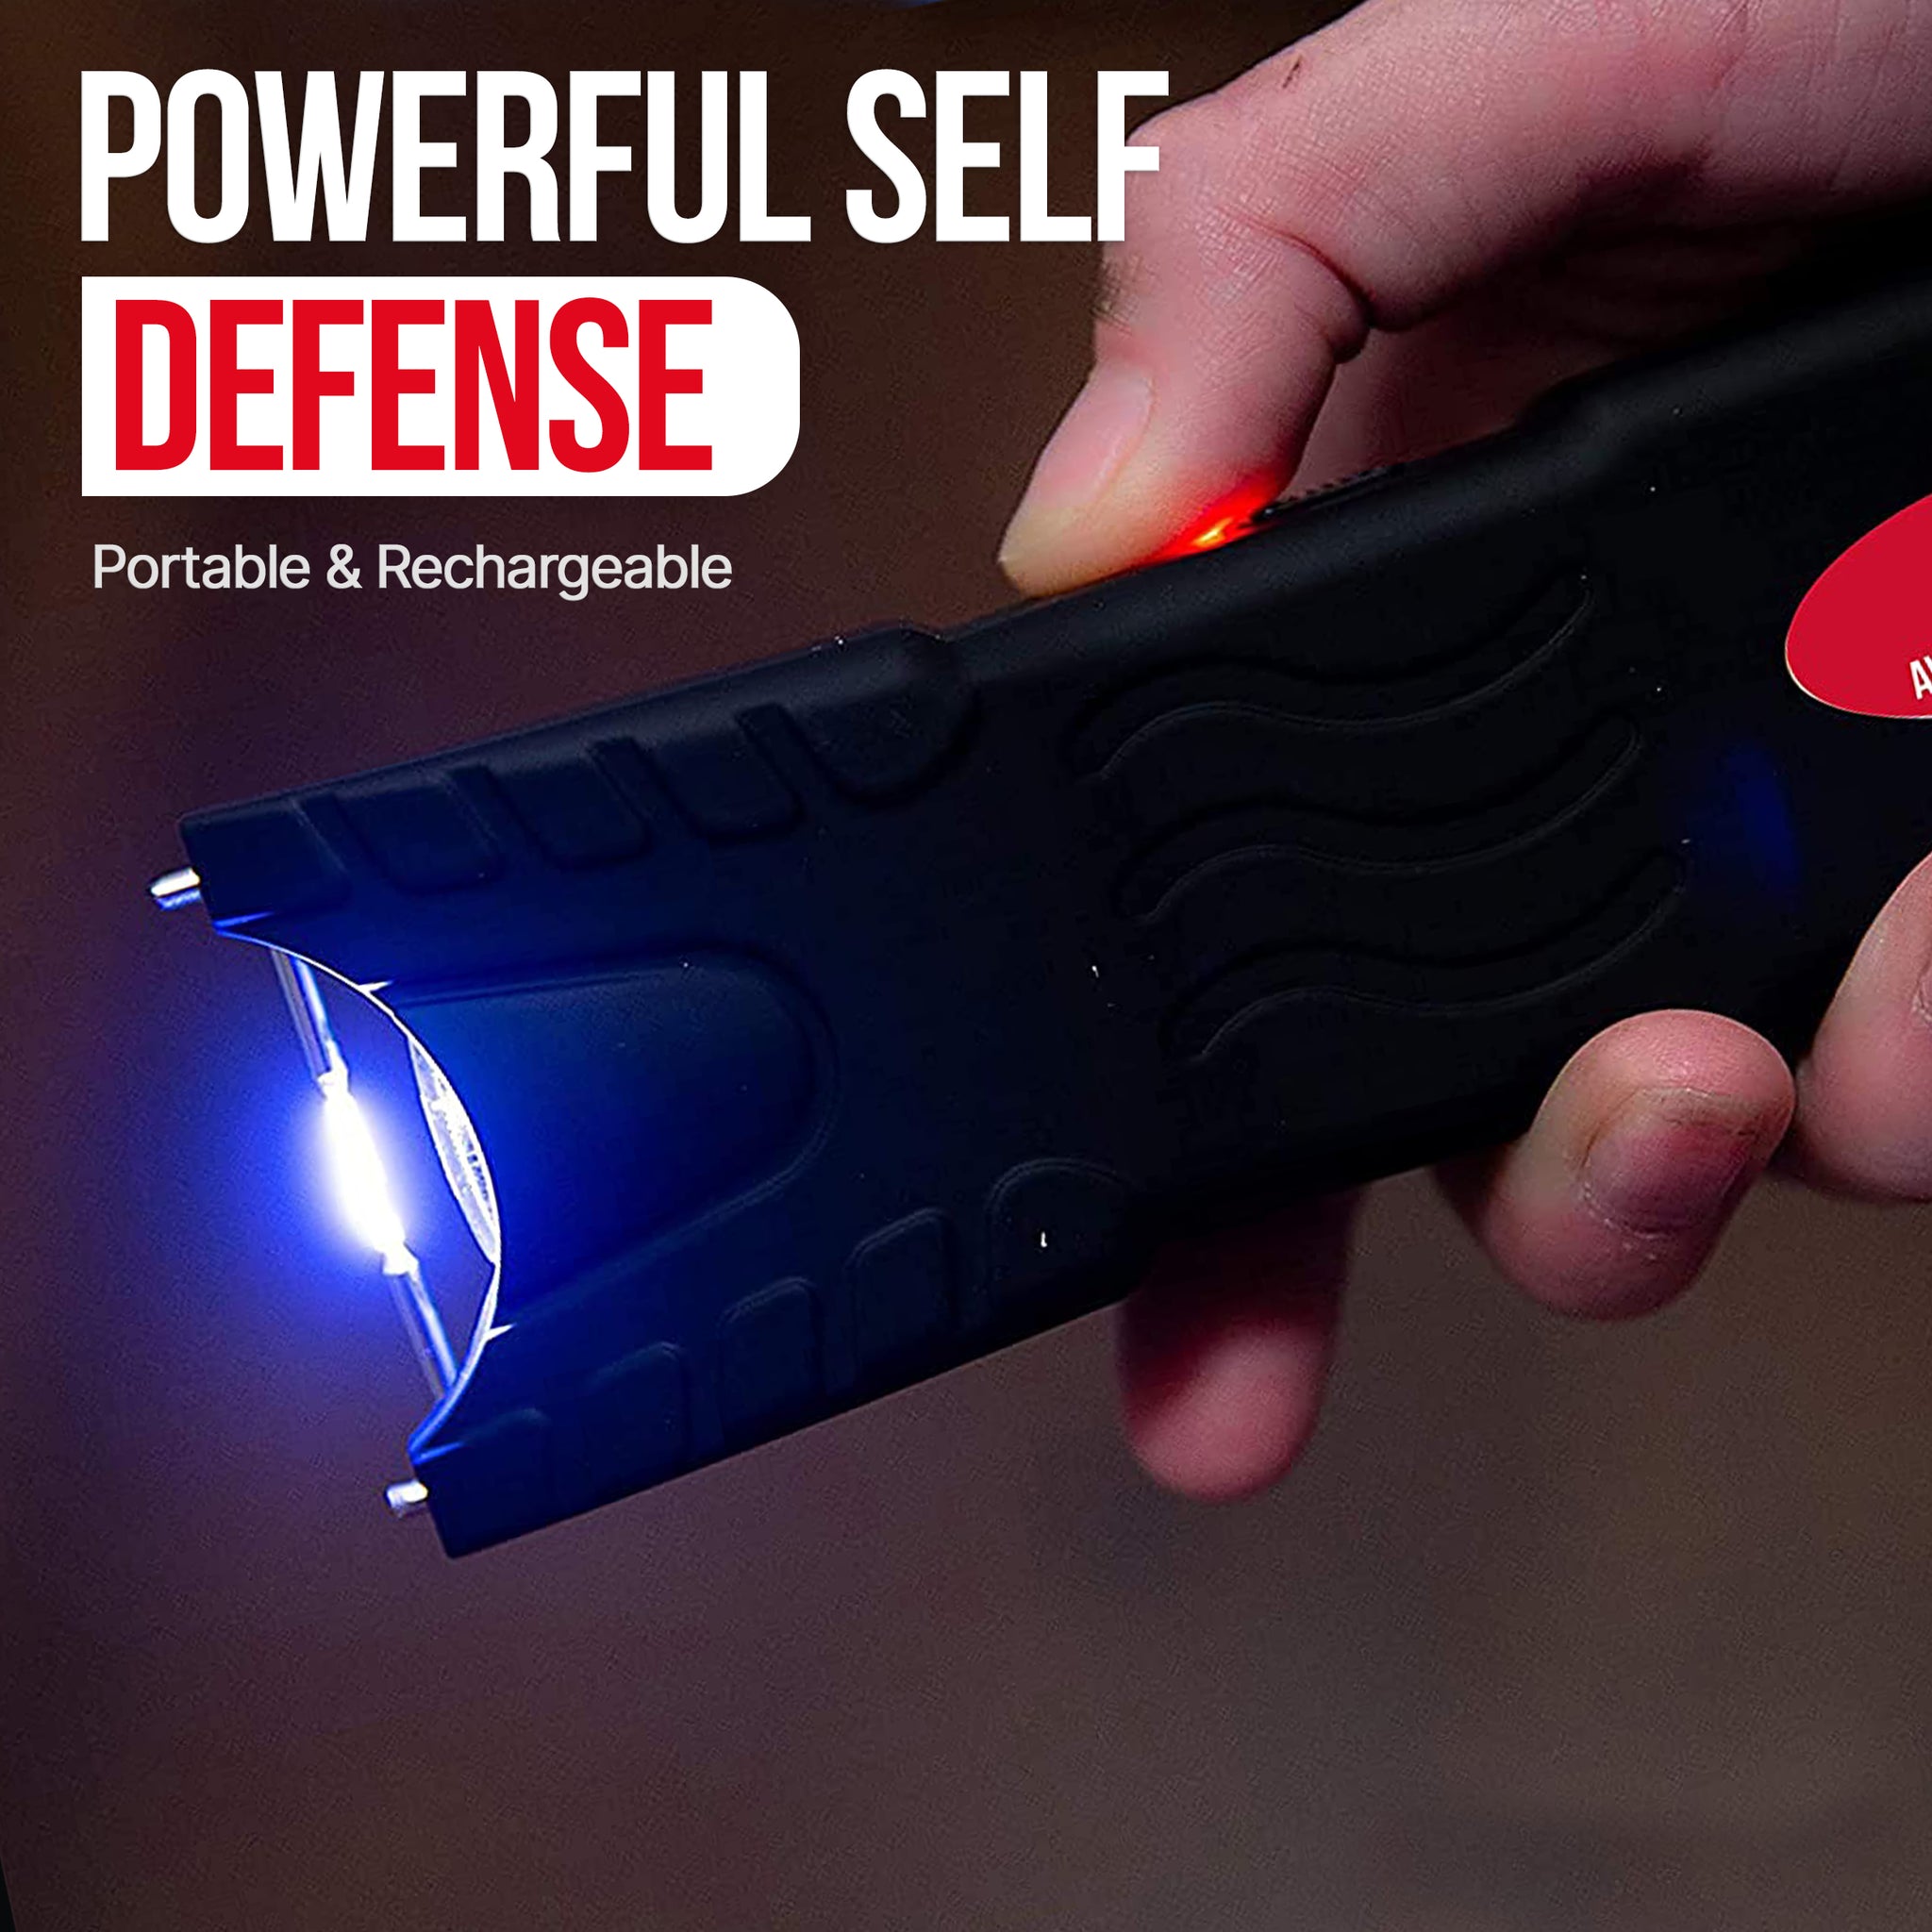 Stun Gun Flashlight – Rechargeable 1.2 µC Charge for Powerful Self Defense – Bright 120 Lumens LED  and Holster, Pink,Black